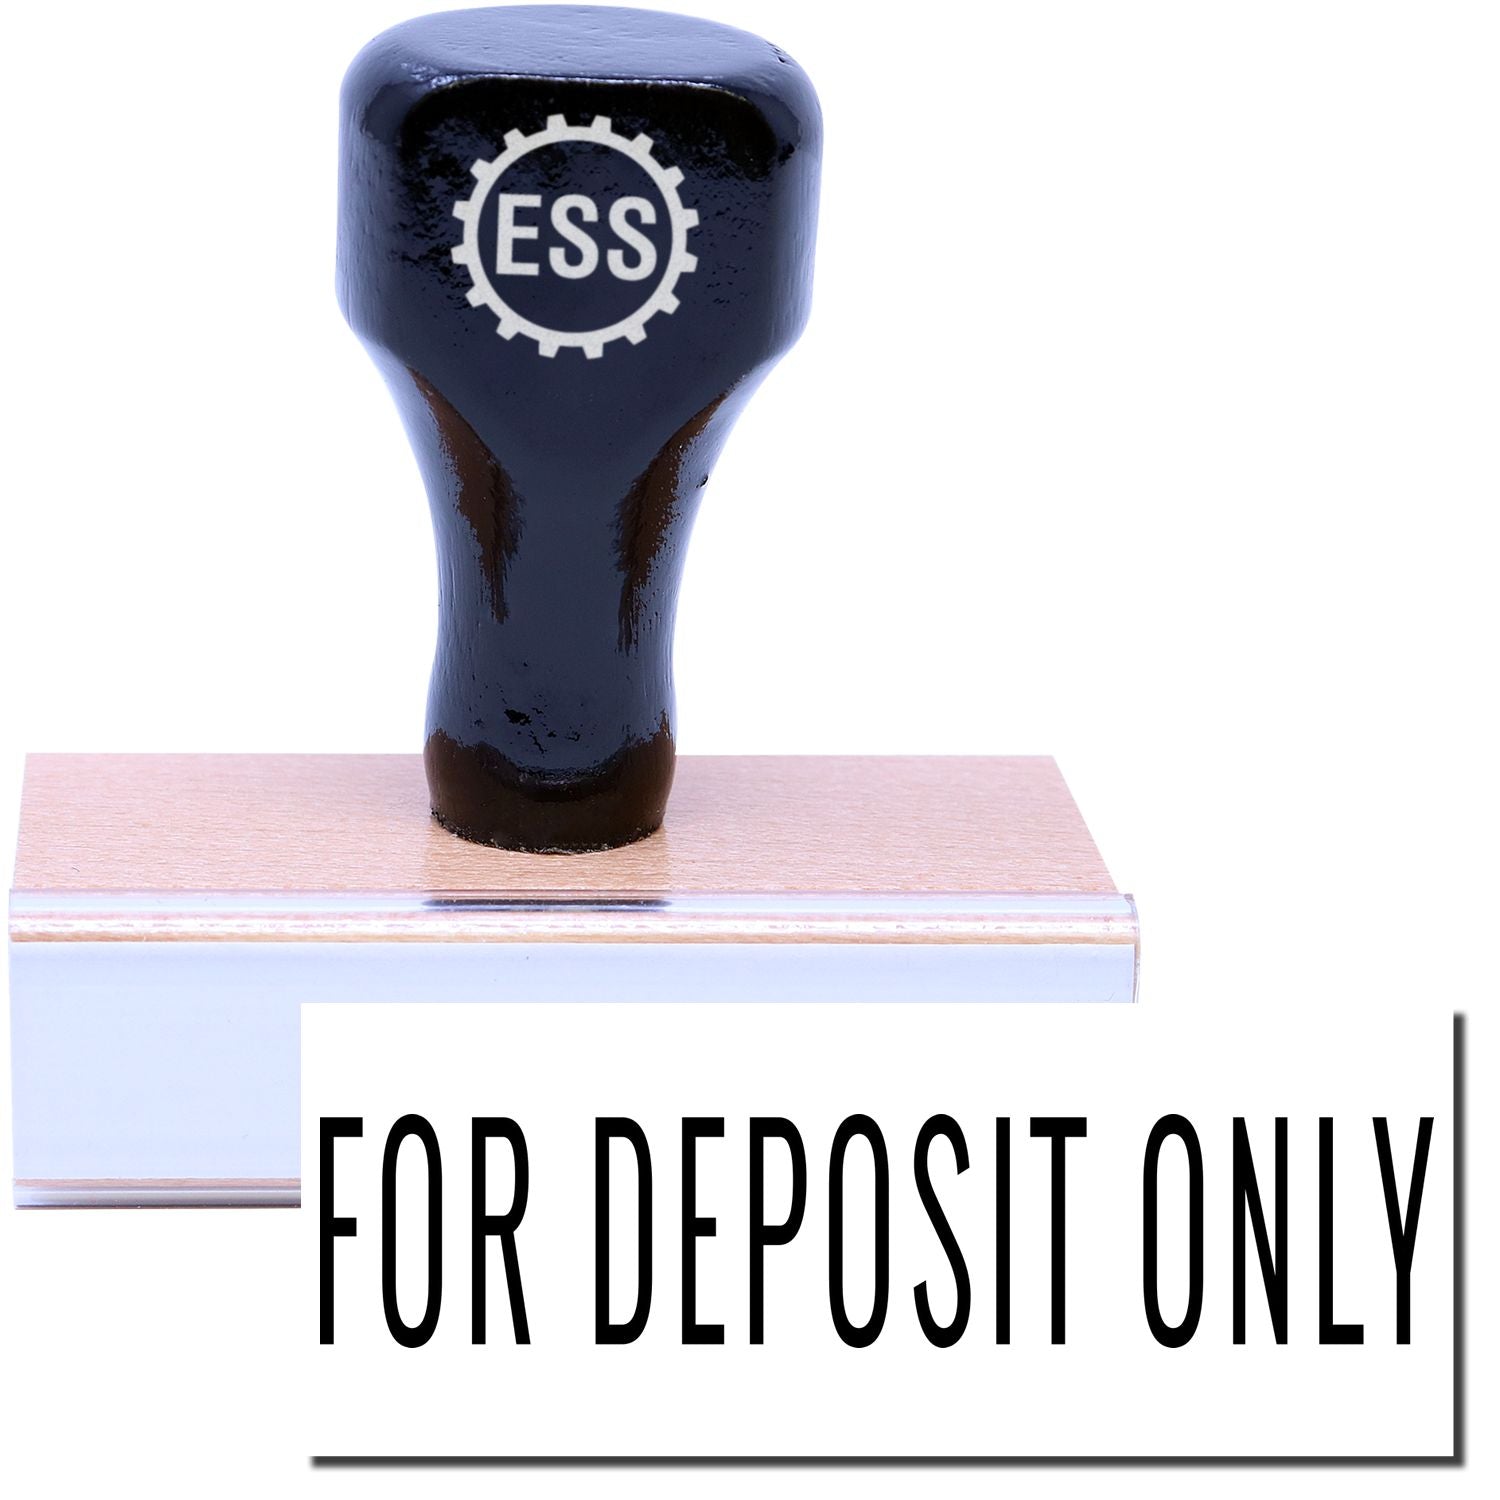 A stock office rubber stamp with a stamped image showing how the text "FOR DEPOSIT ONLY" in a narrow font is displayed after stamping.